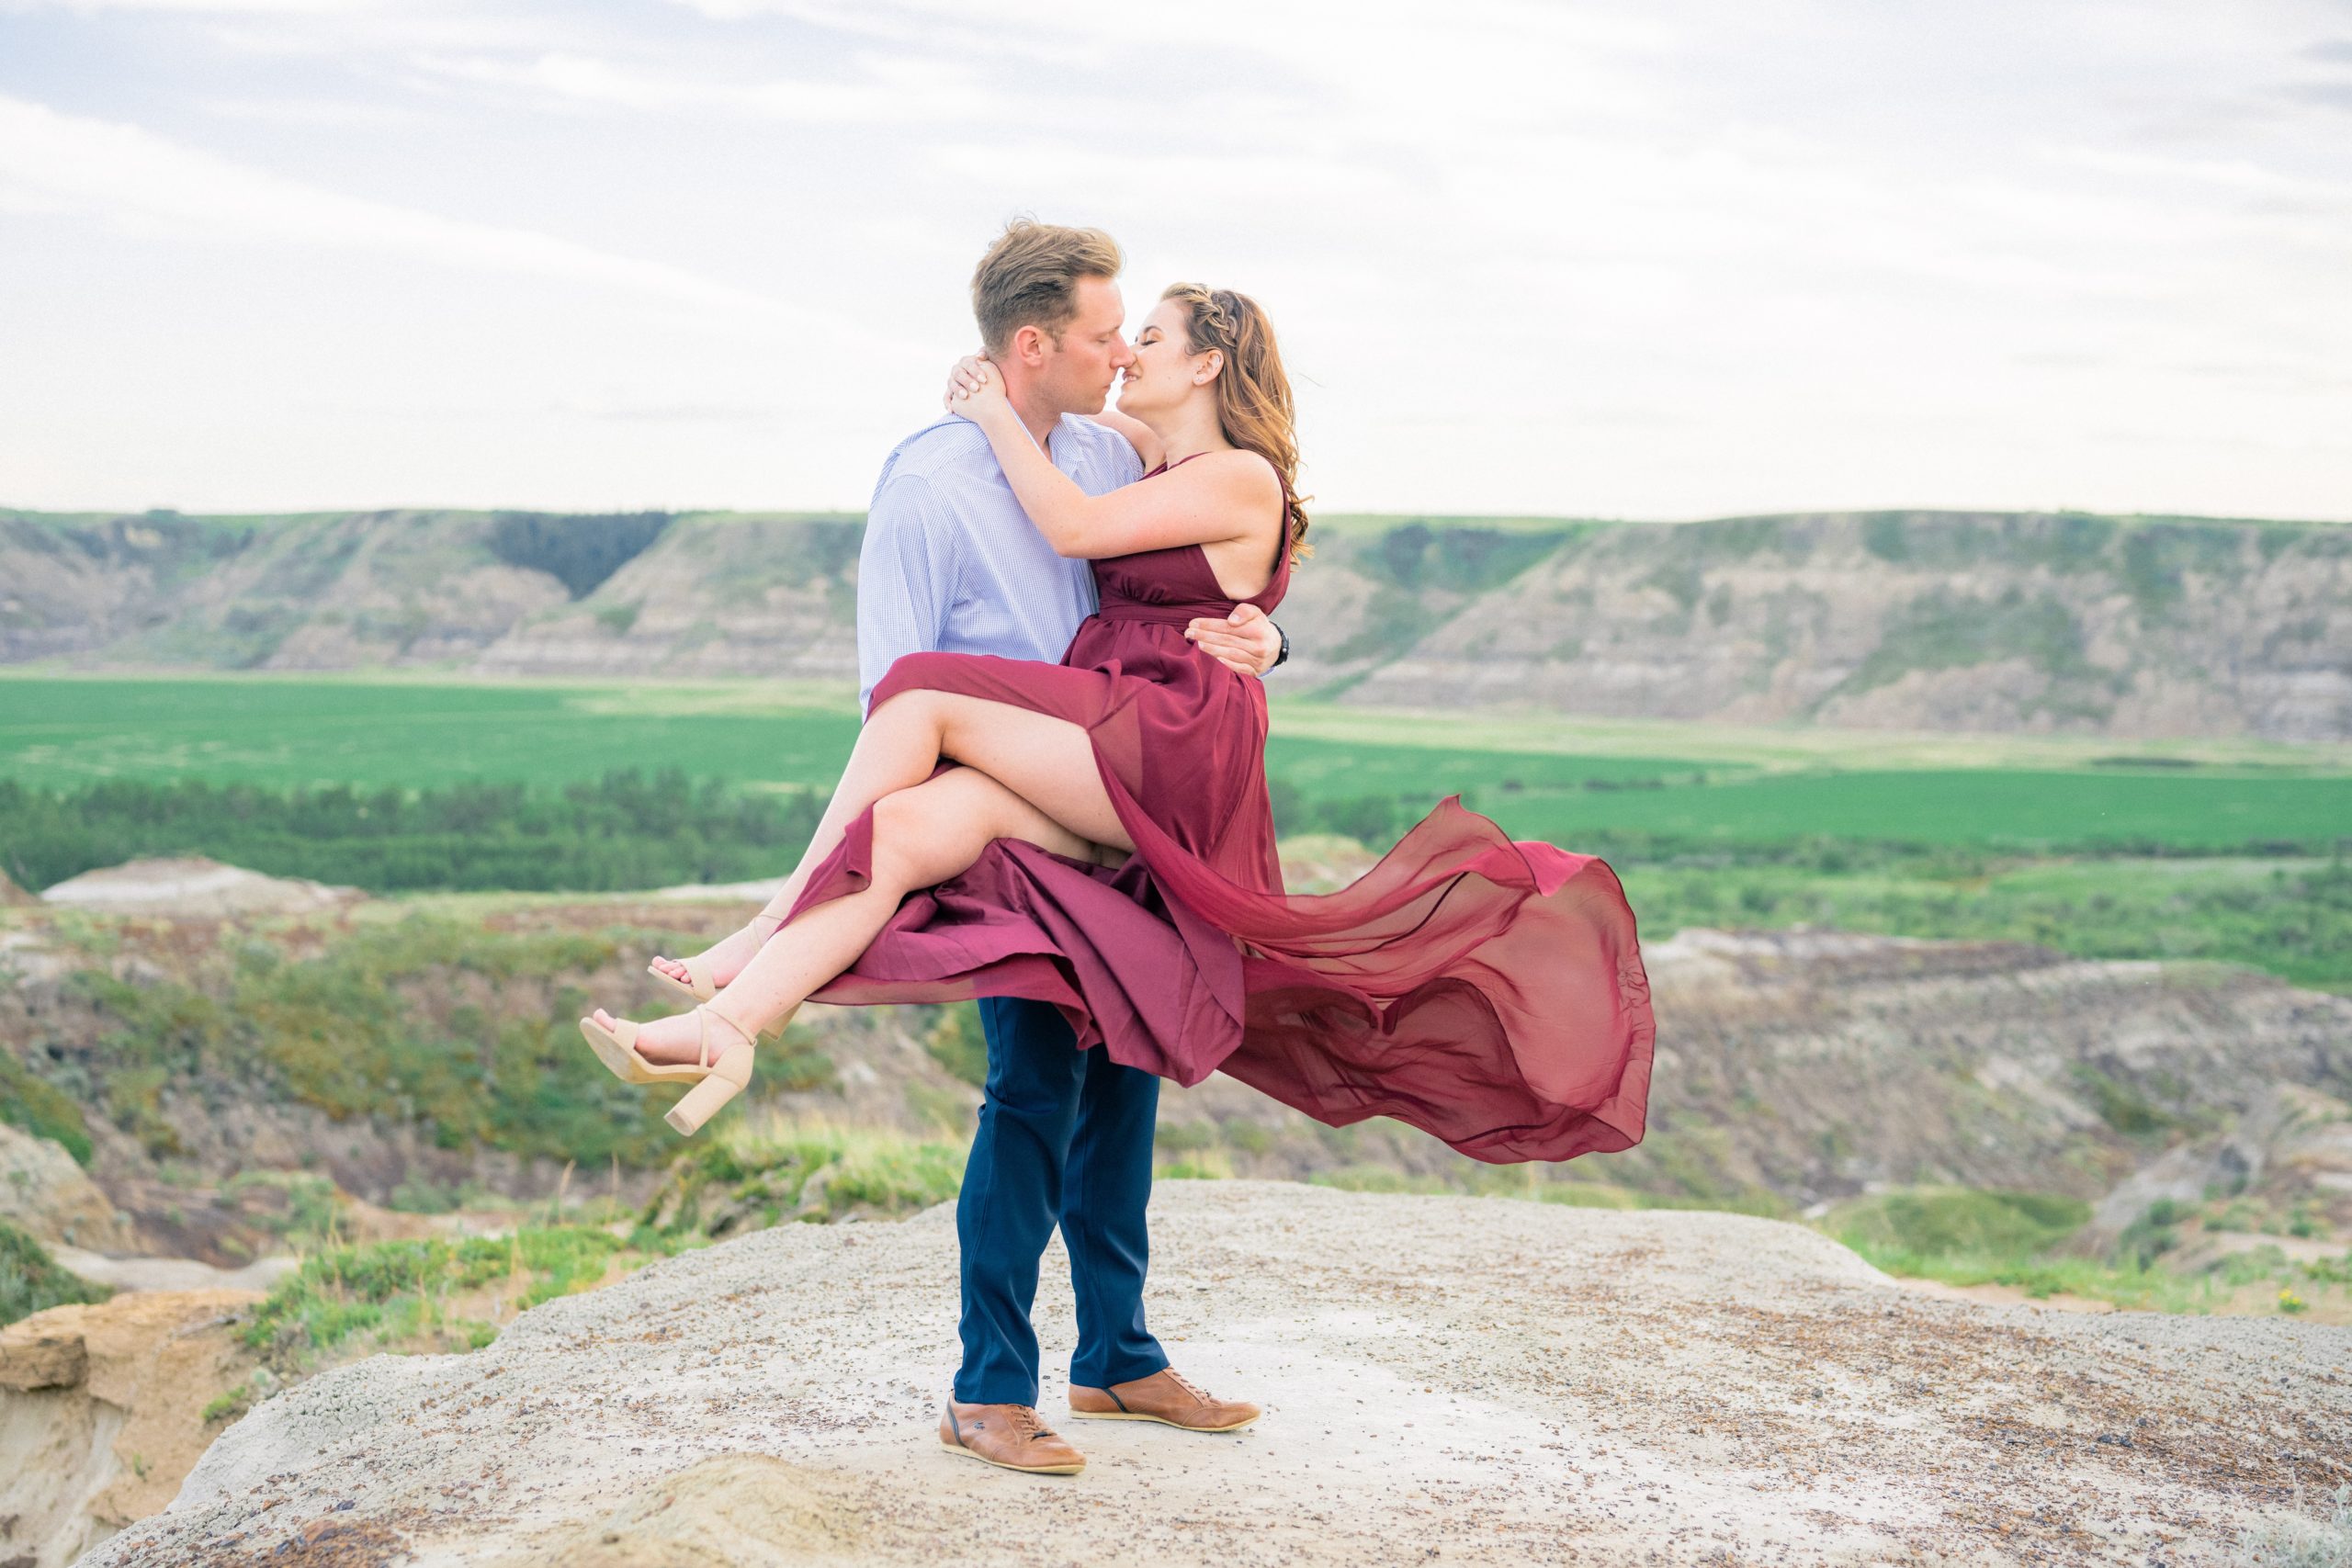 Engaged couple in love. Outdoor destination engagement photo.